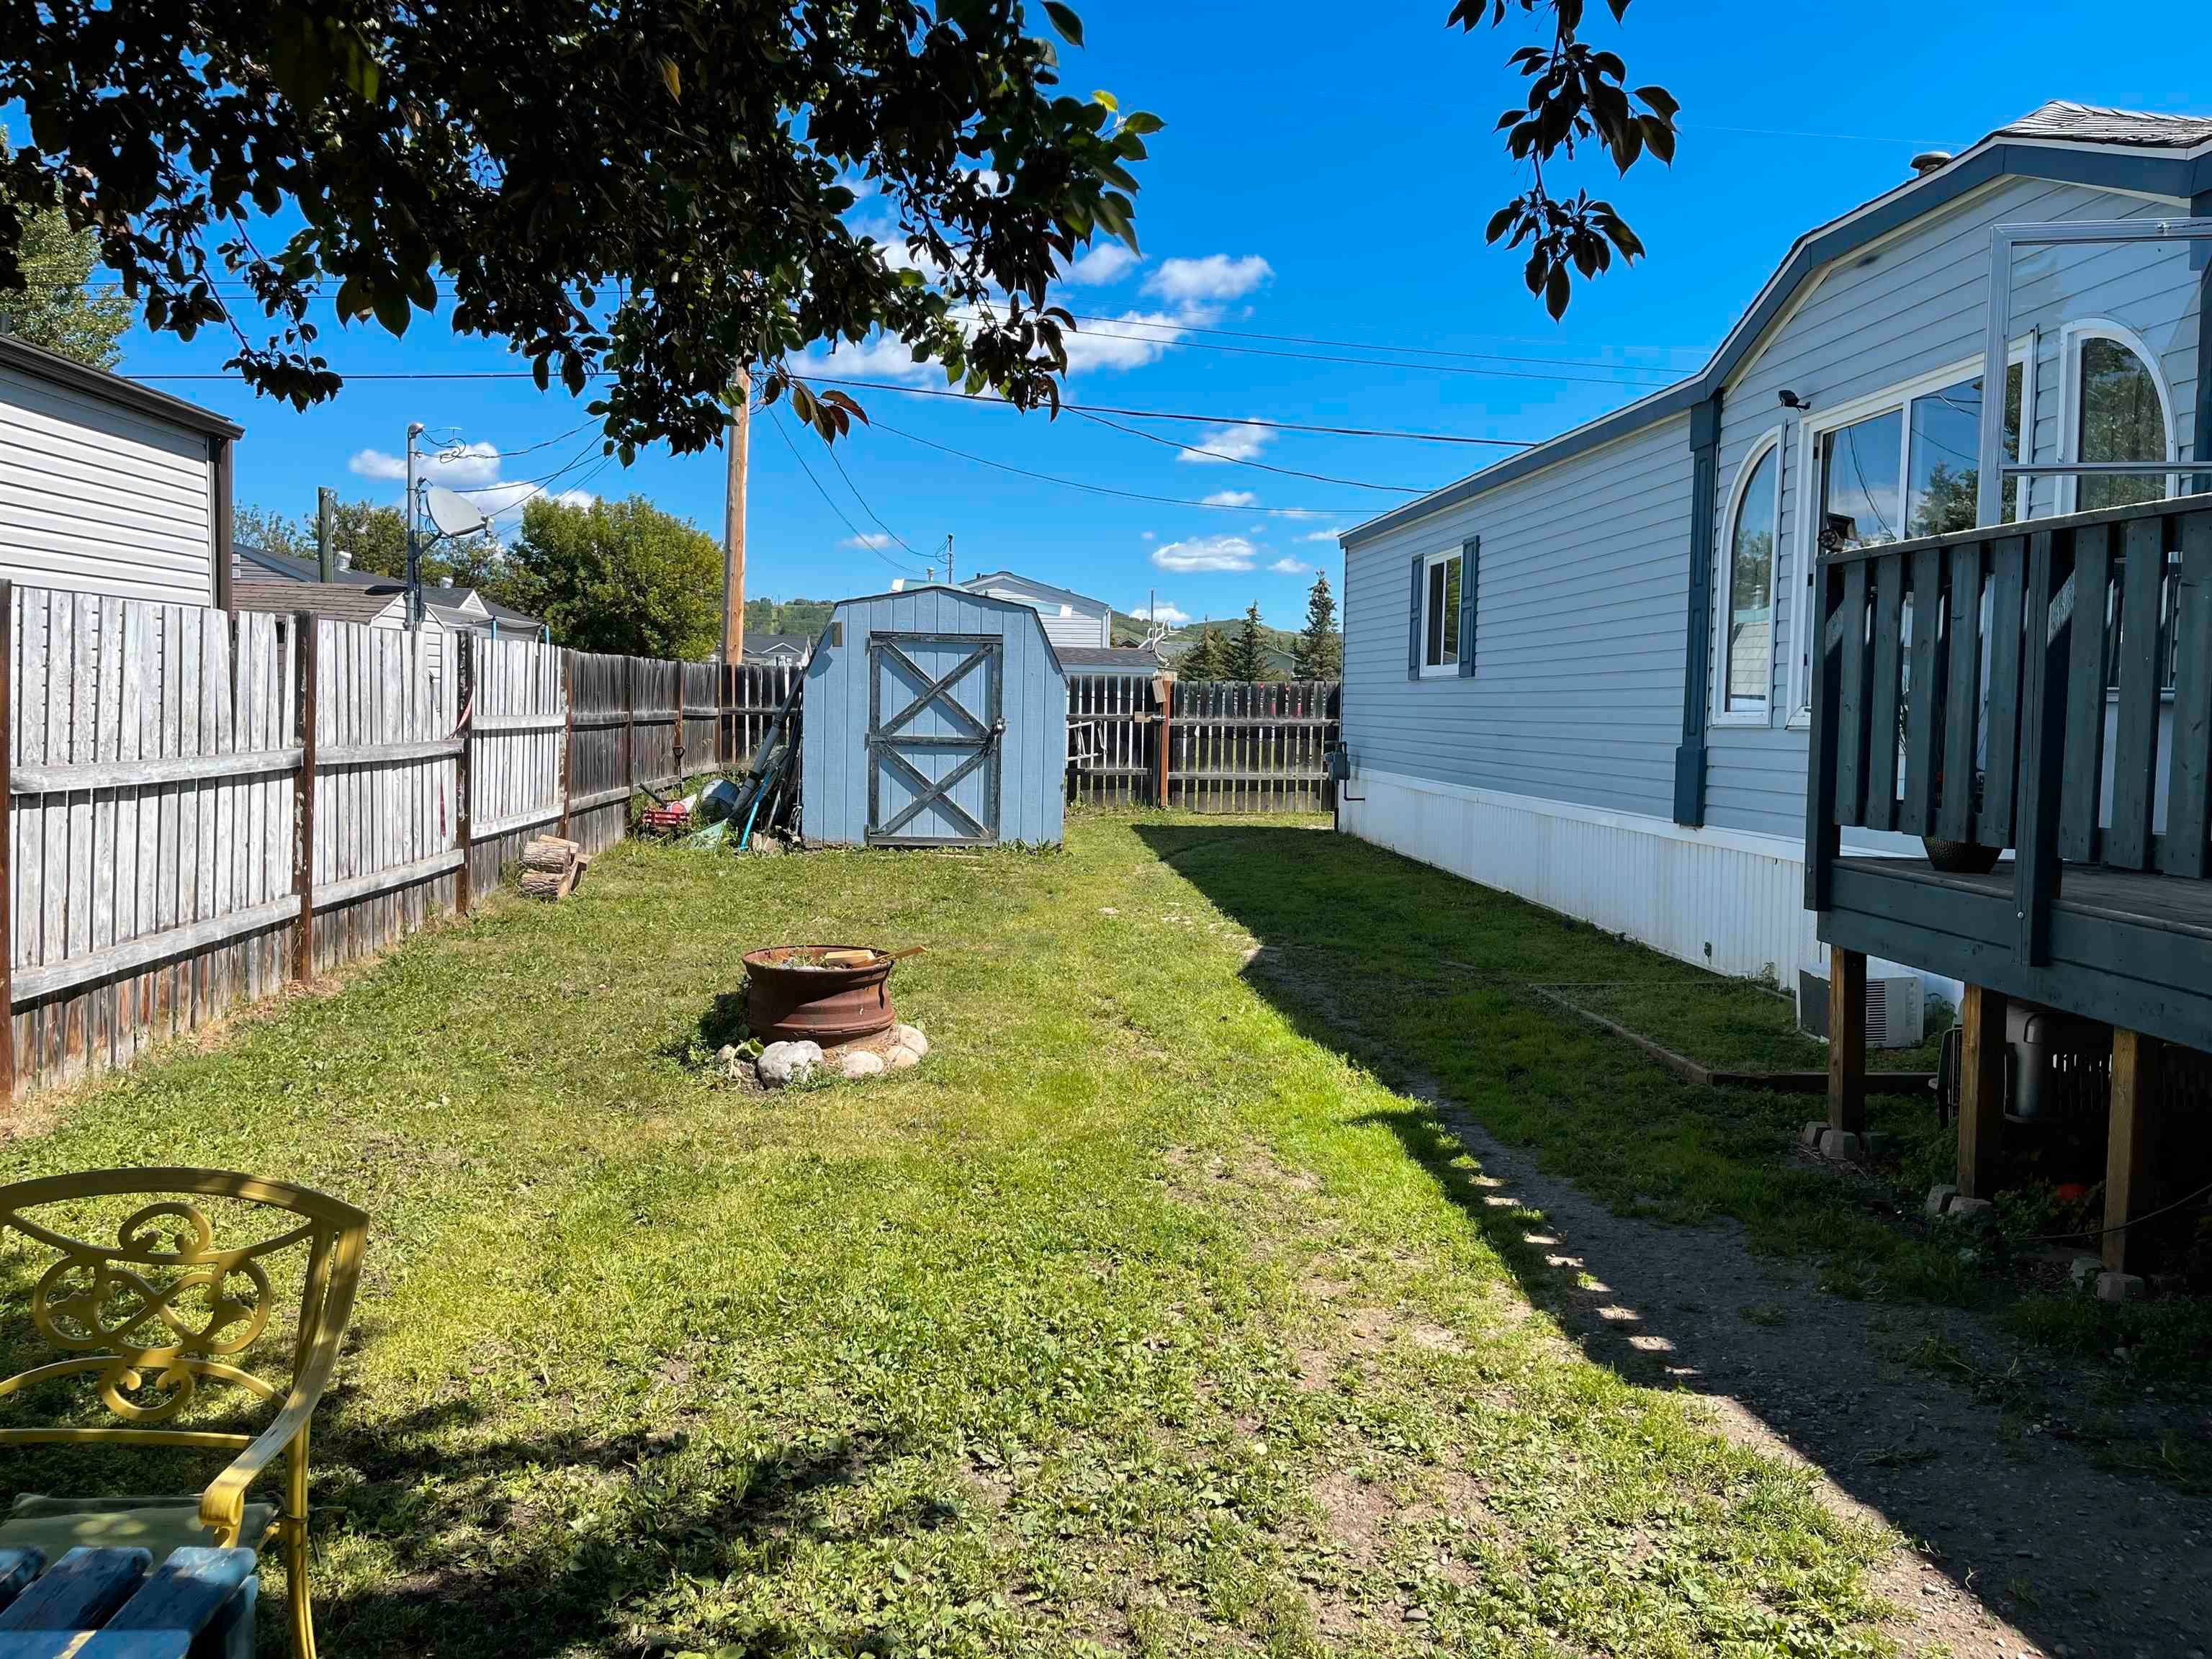 Photo 16: Photos: 10339 99 Street: Taylor Manufactured Home for sale (Fort St. John)  : MLS®# R2632849